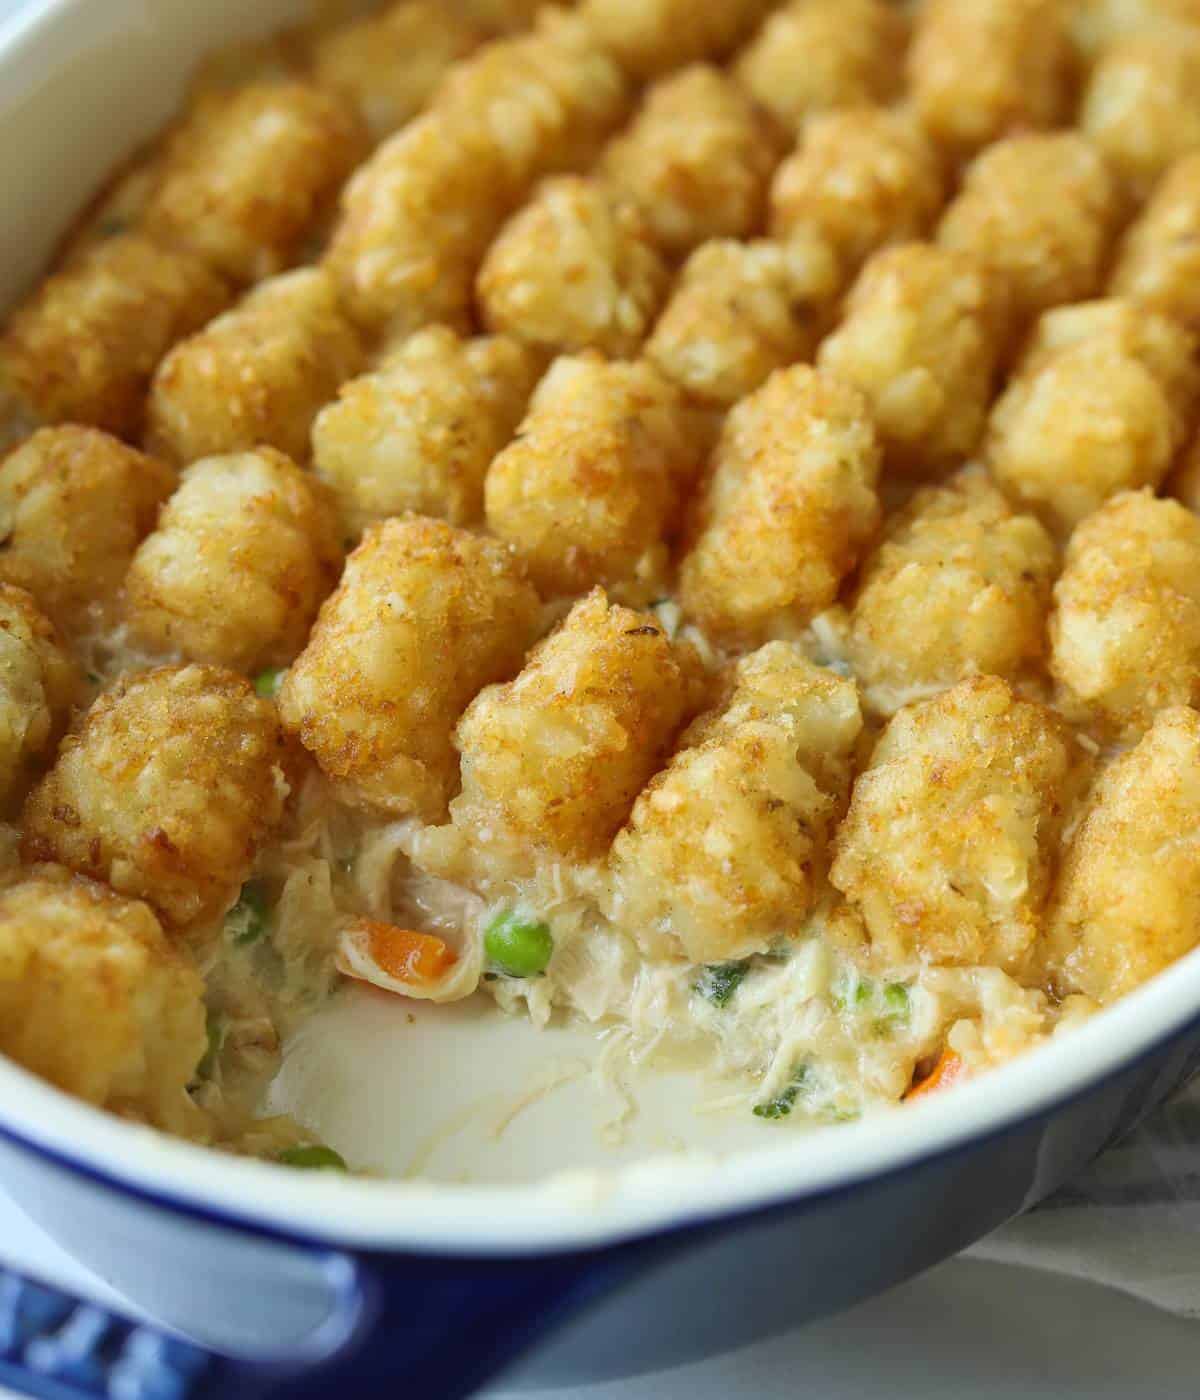 Tater tot casserole in dish with slice missing.